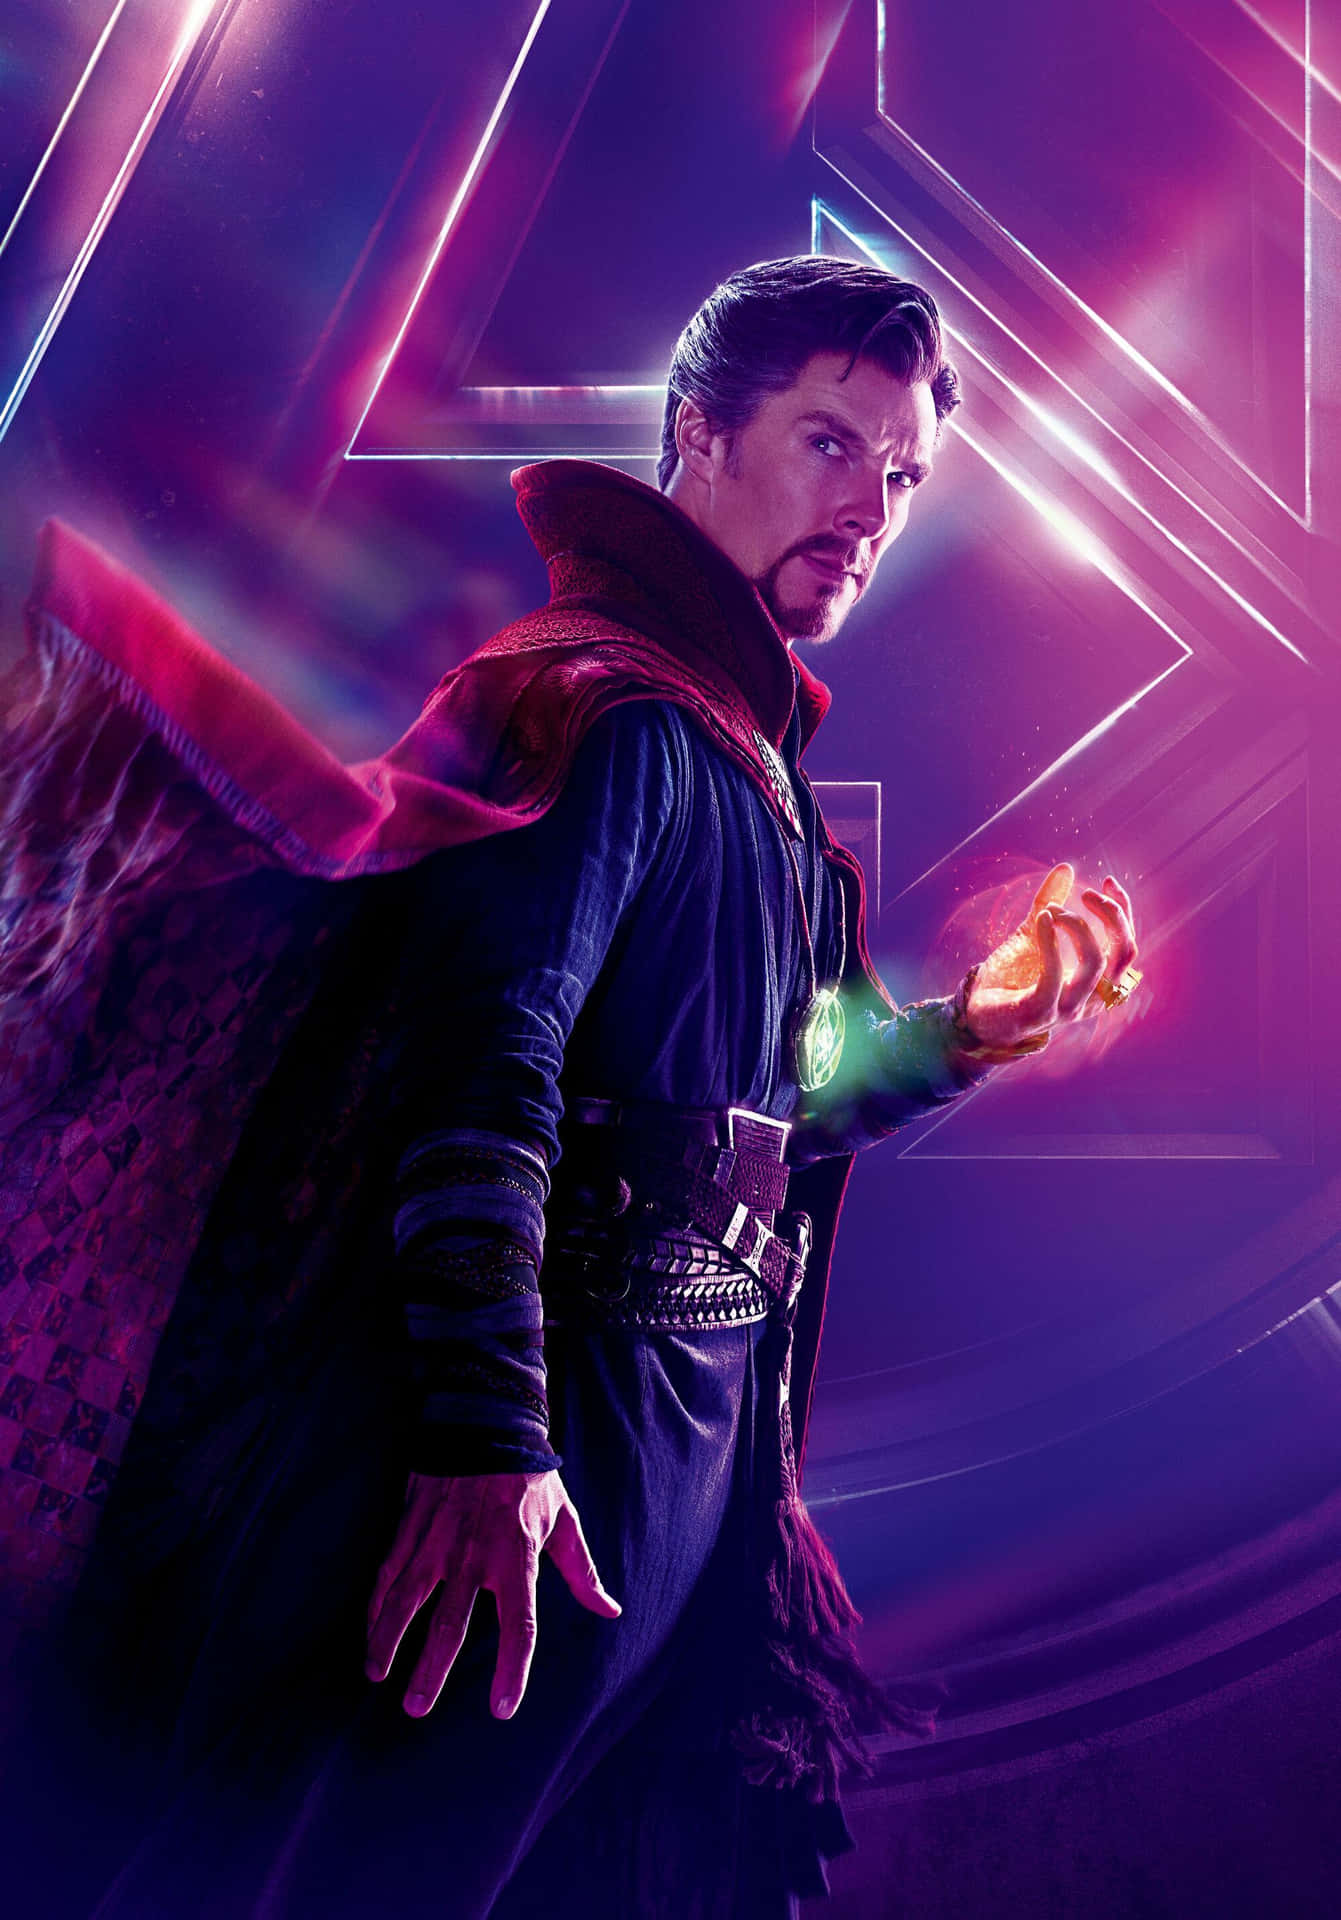 ____ Doctor Strange delves into the dark corners of the Multiverse in pursuit of a mystery in Marvel's upcoming film, Multiverse Of Madness. Wallpaper